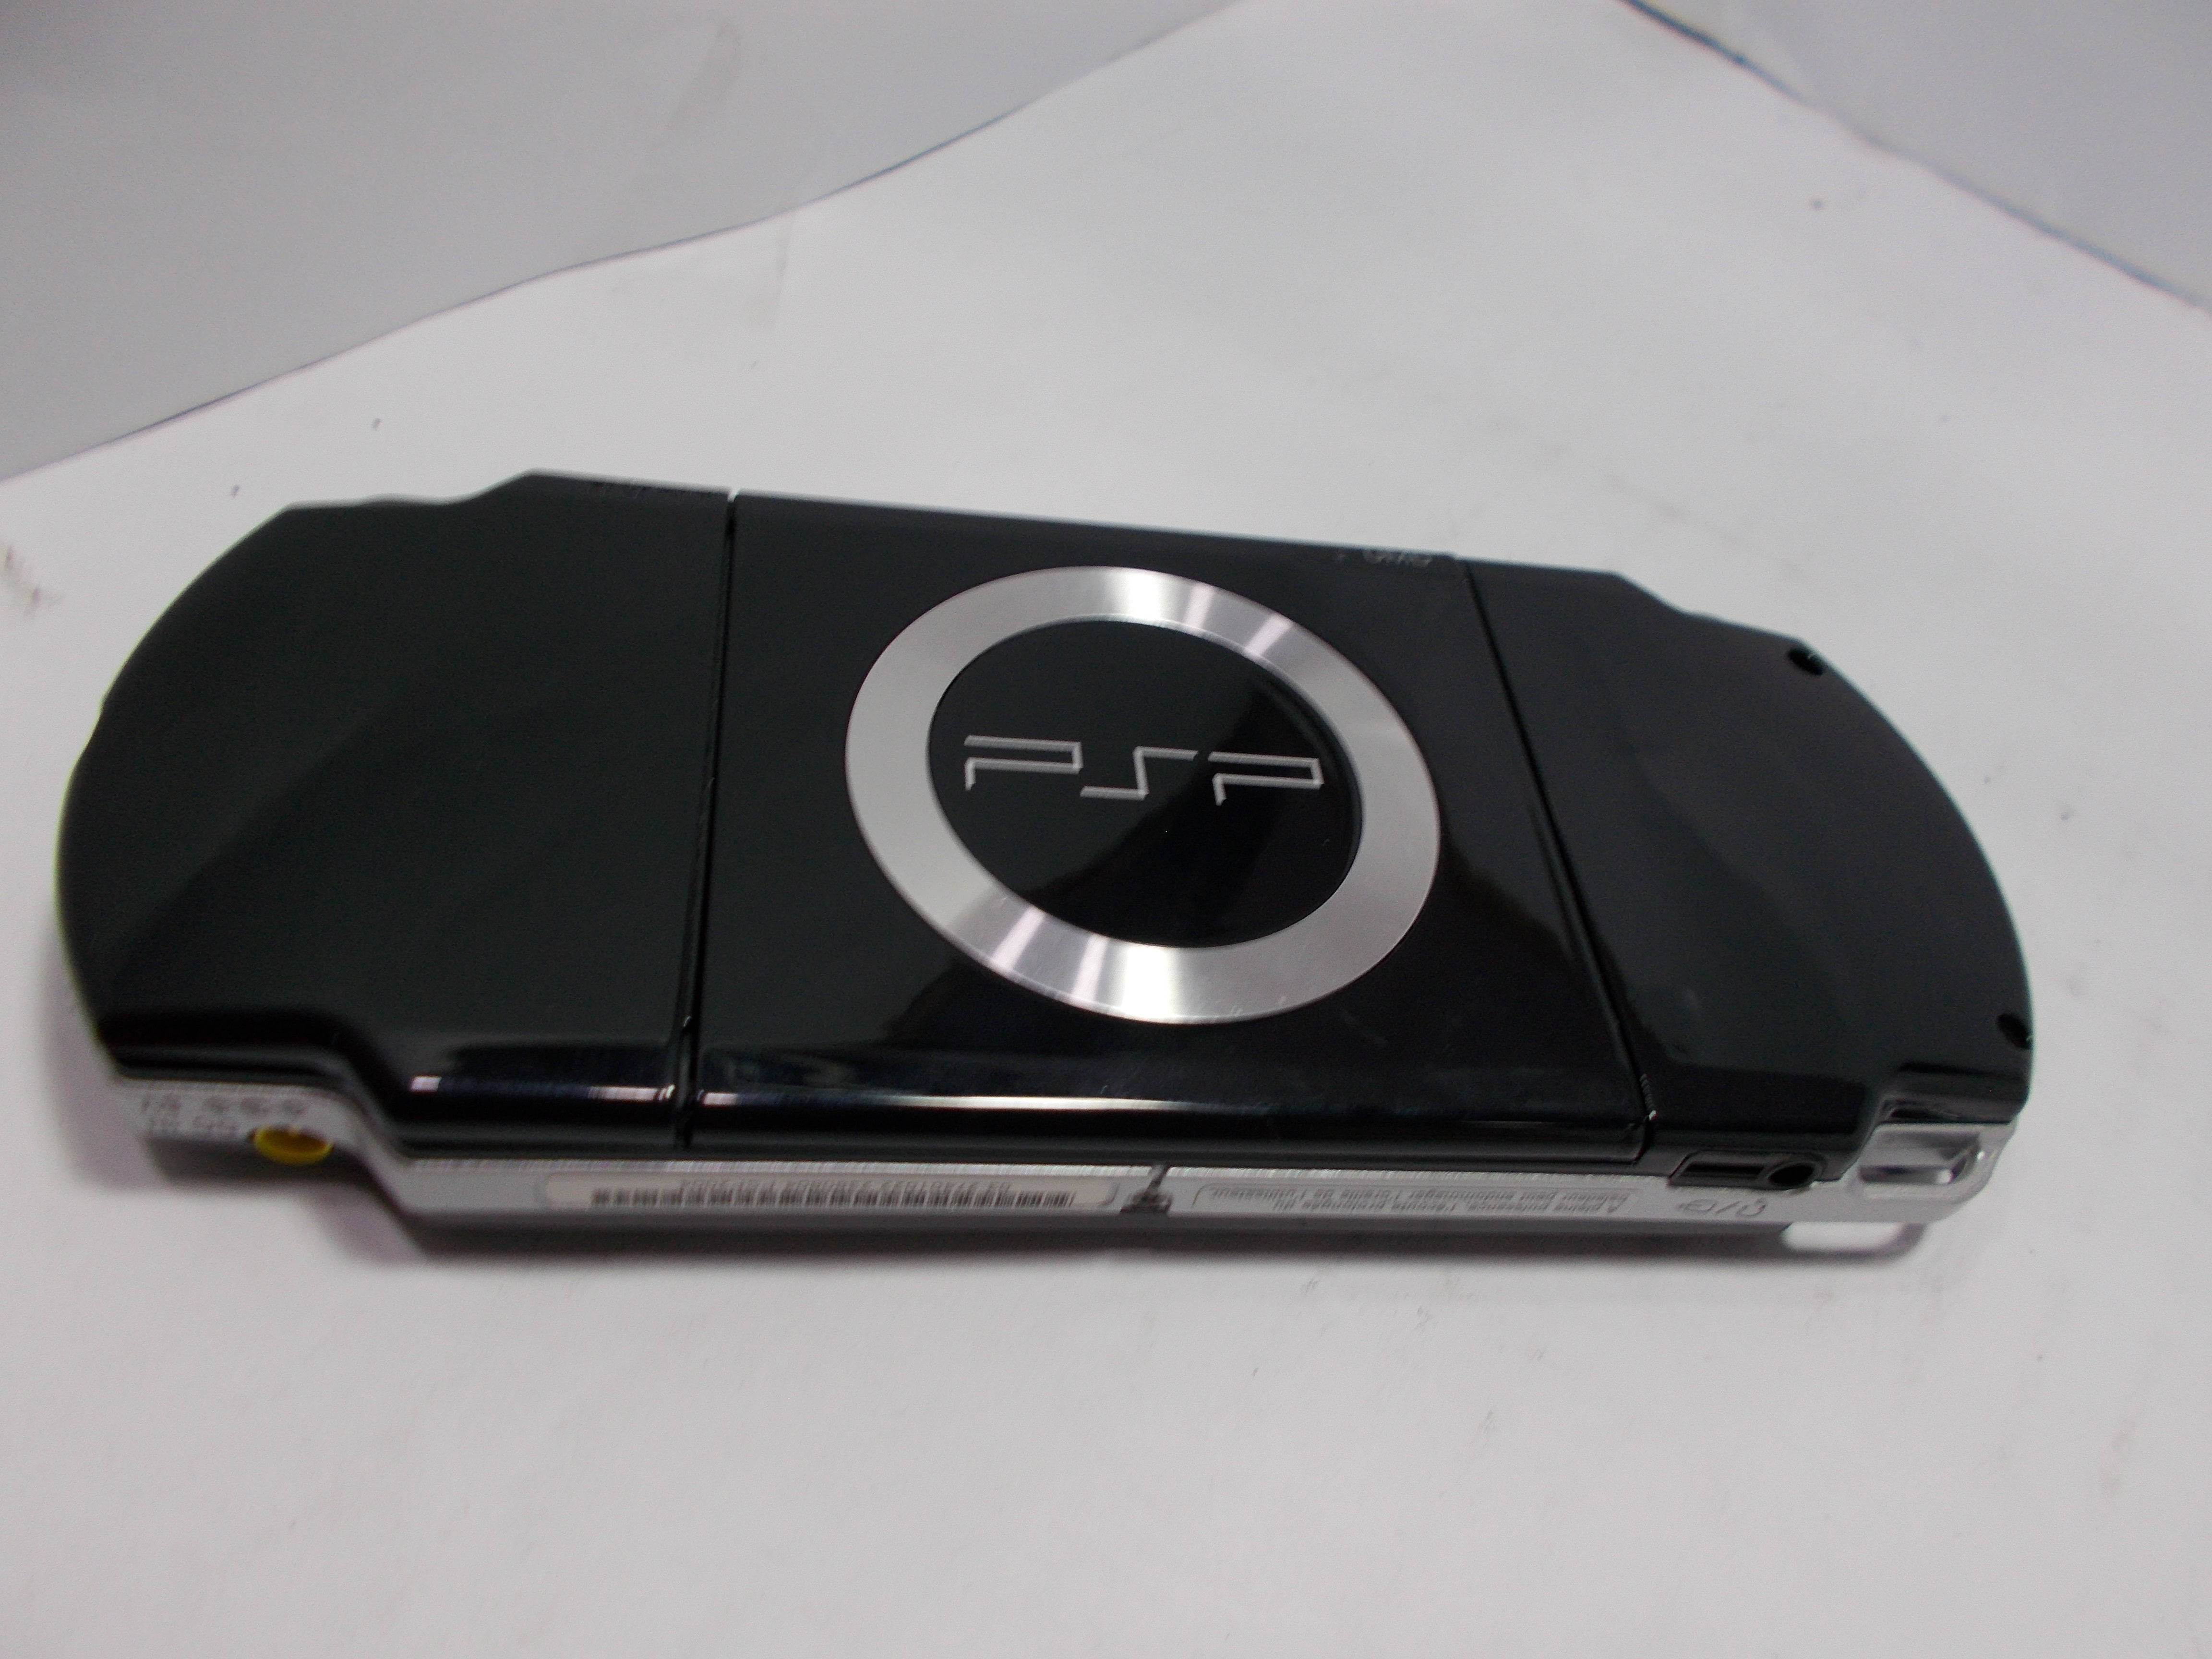 Sony Psp With Cover And Accessories